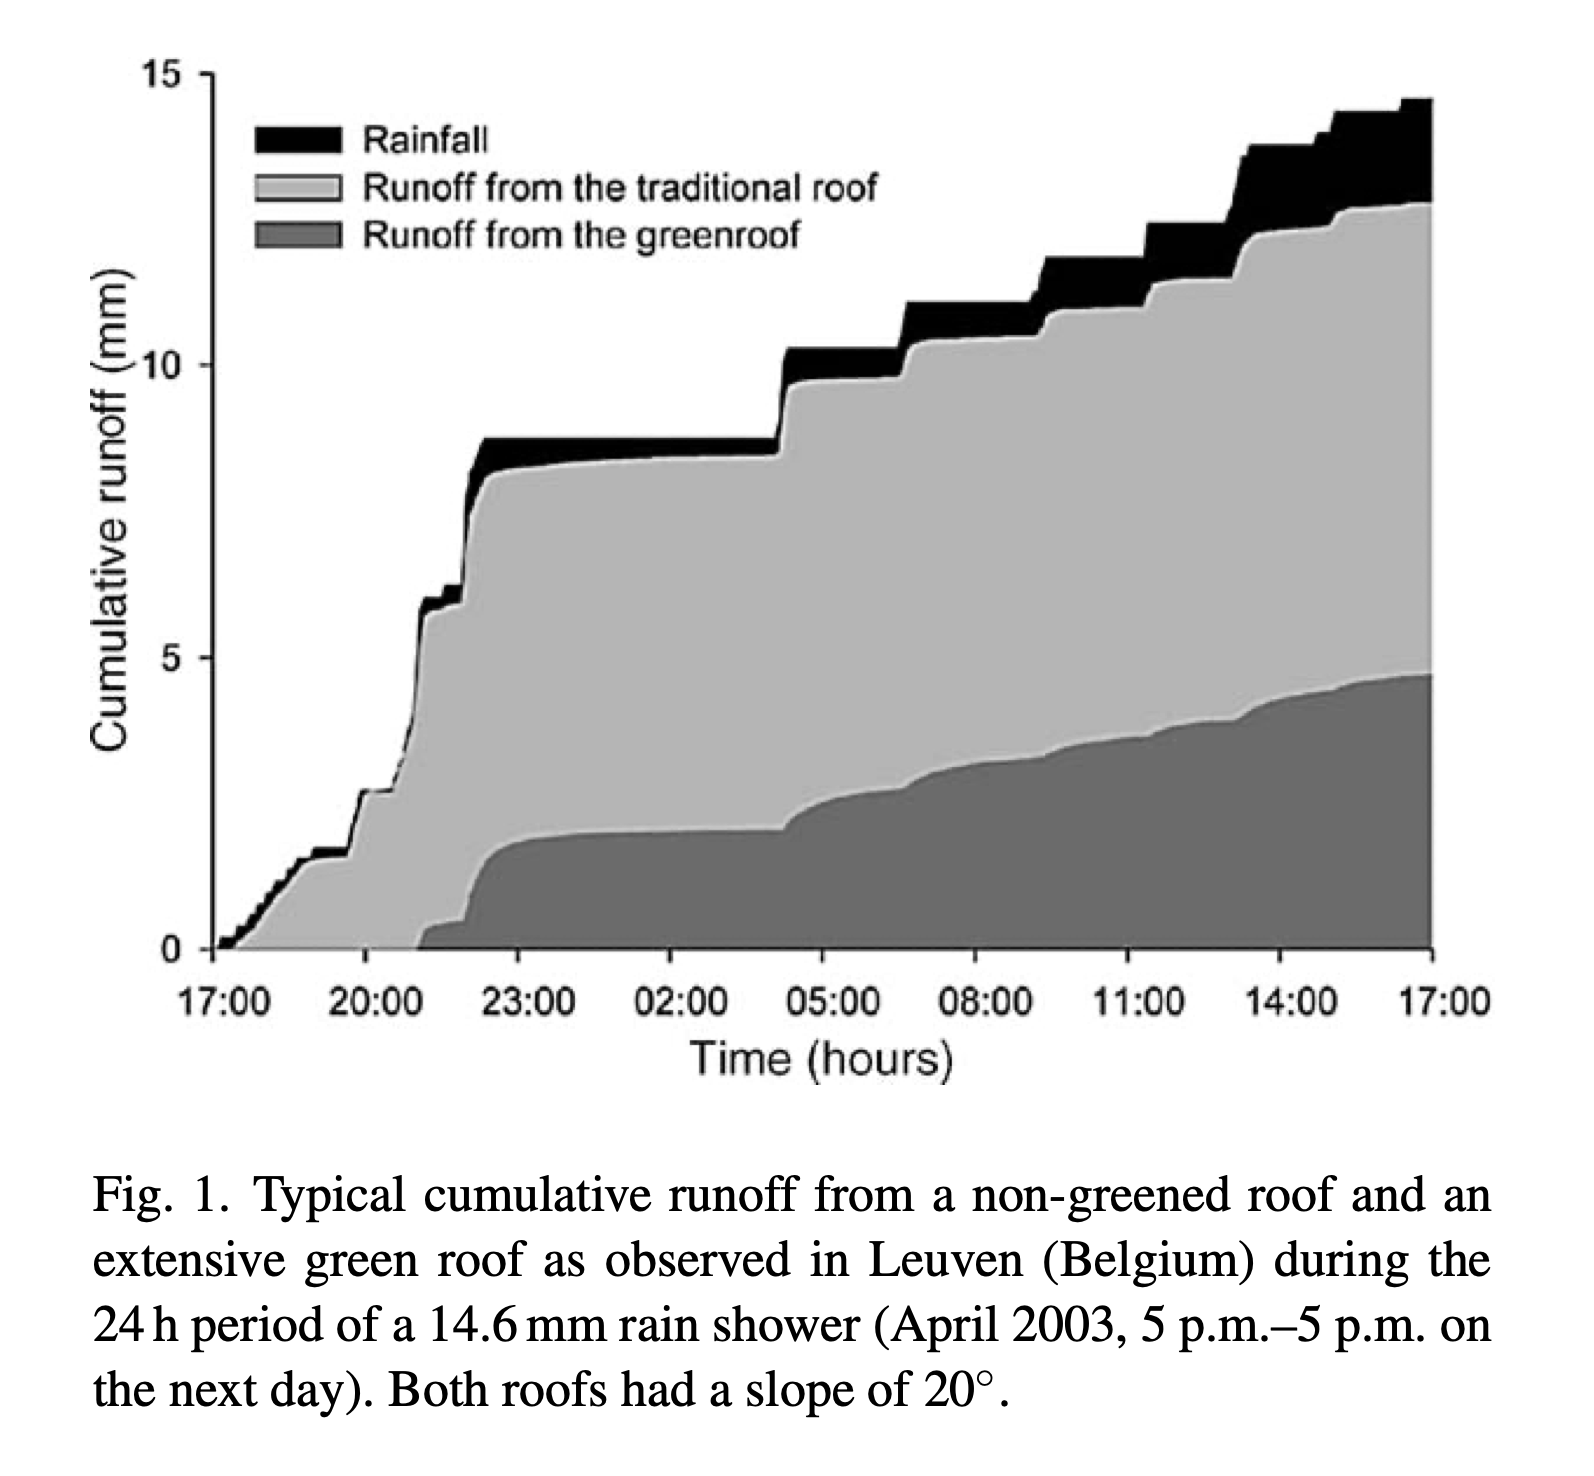 graph to illustrate the difference in runoff between standard roofs and green roofs